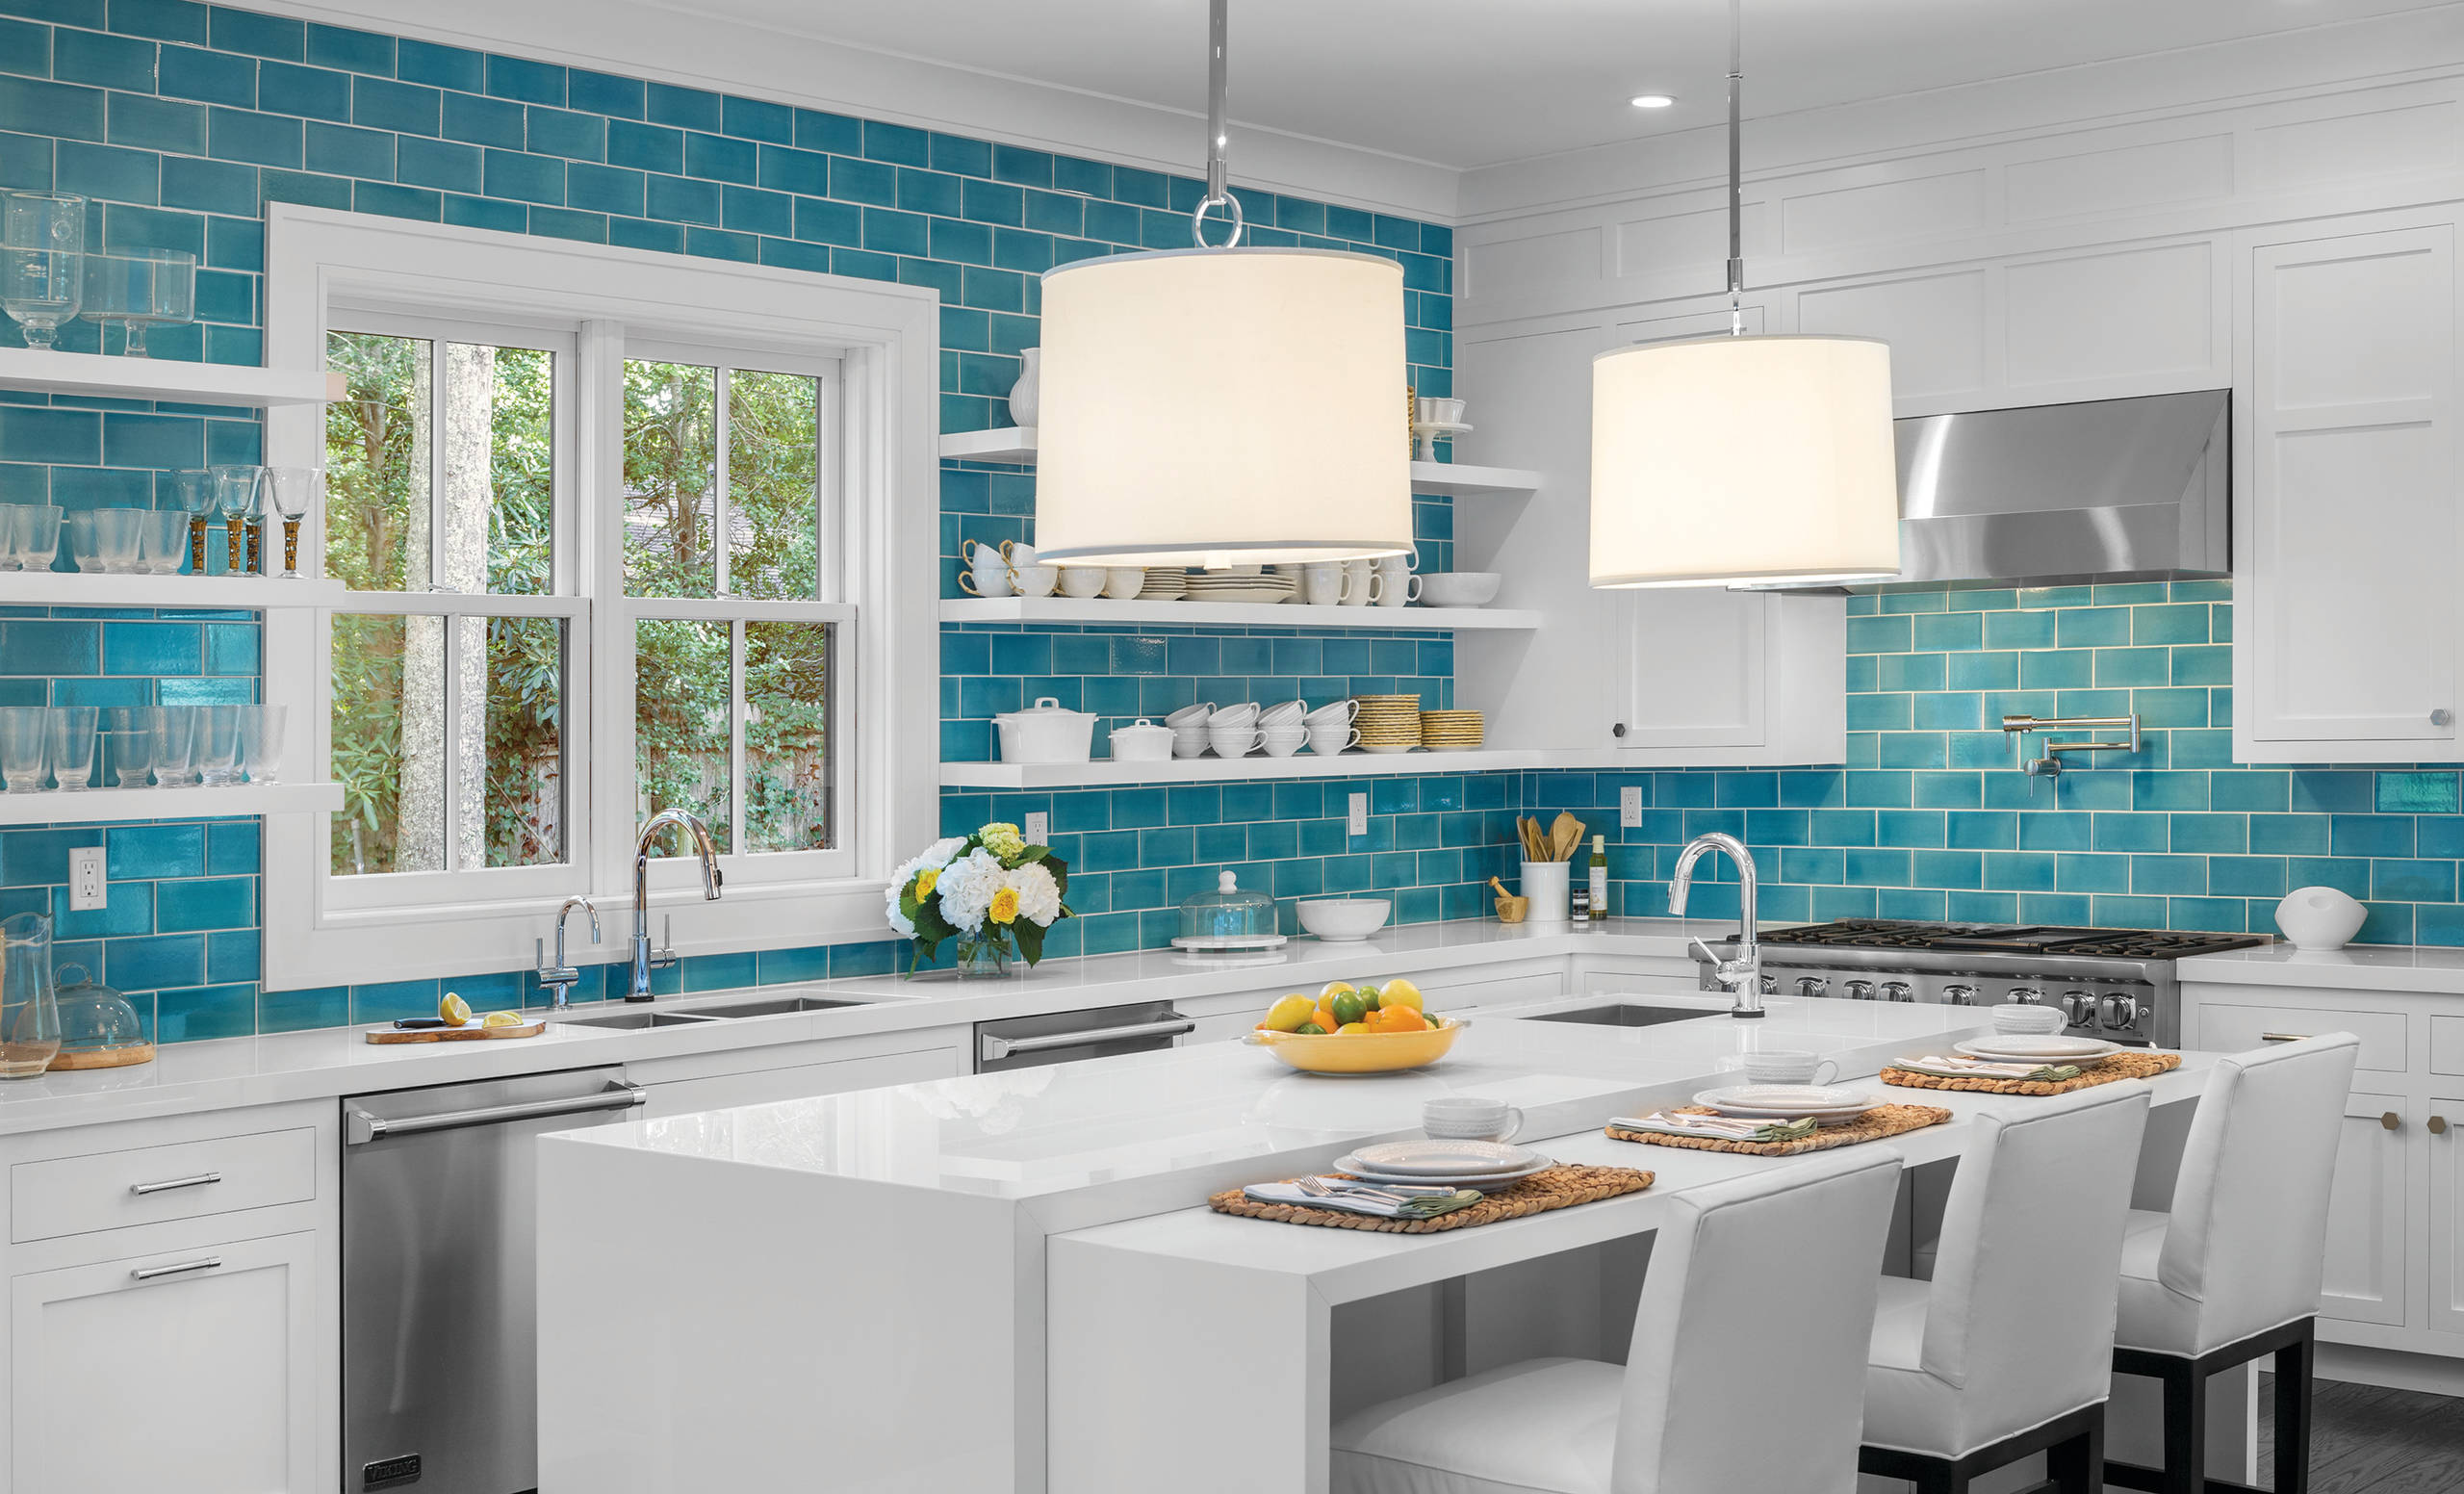 Turquoise Kitchens at their Refreshing Best: Welcome Home Breezy